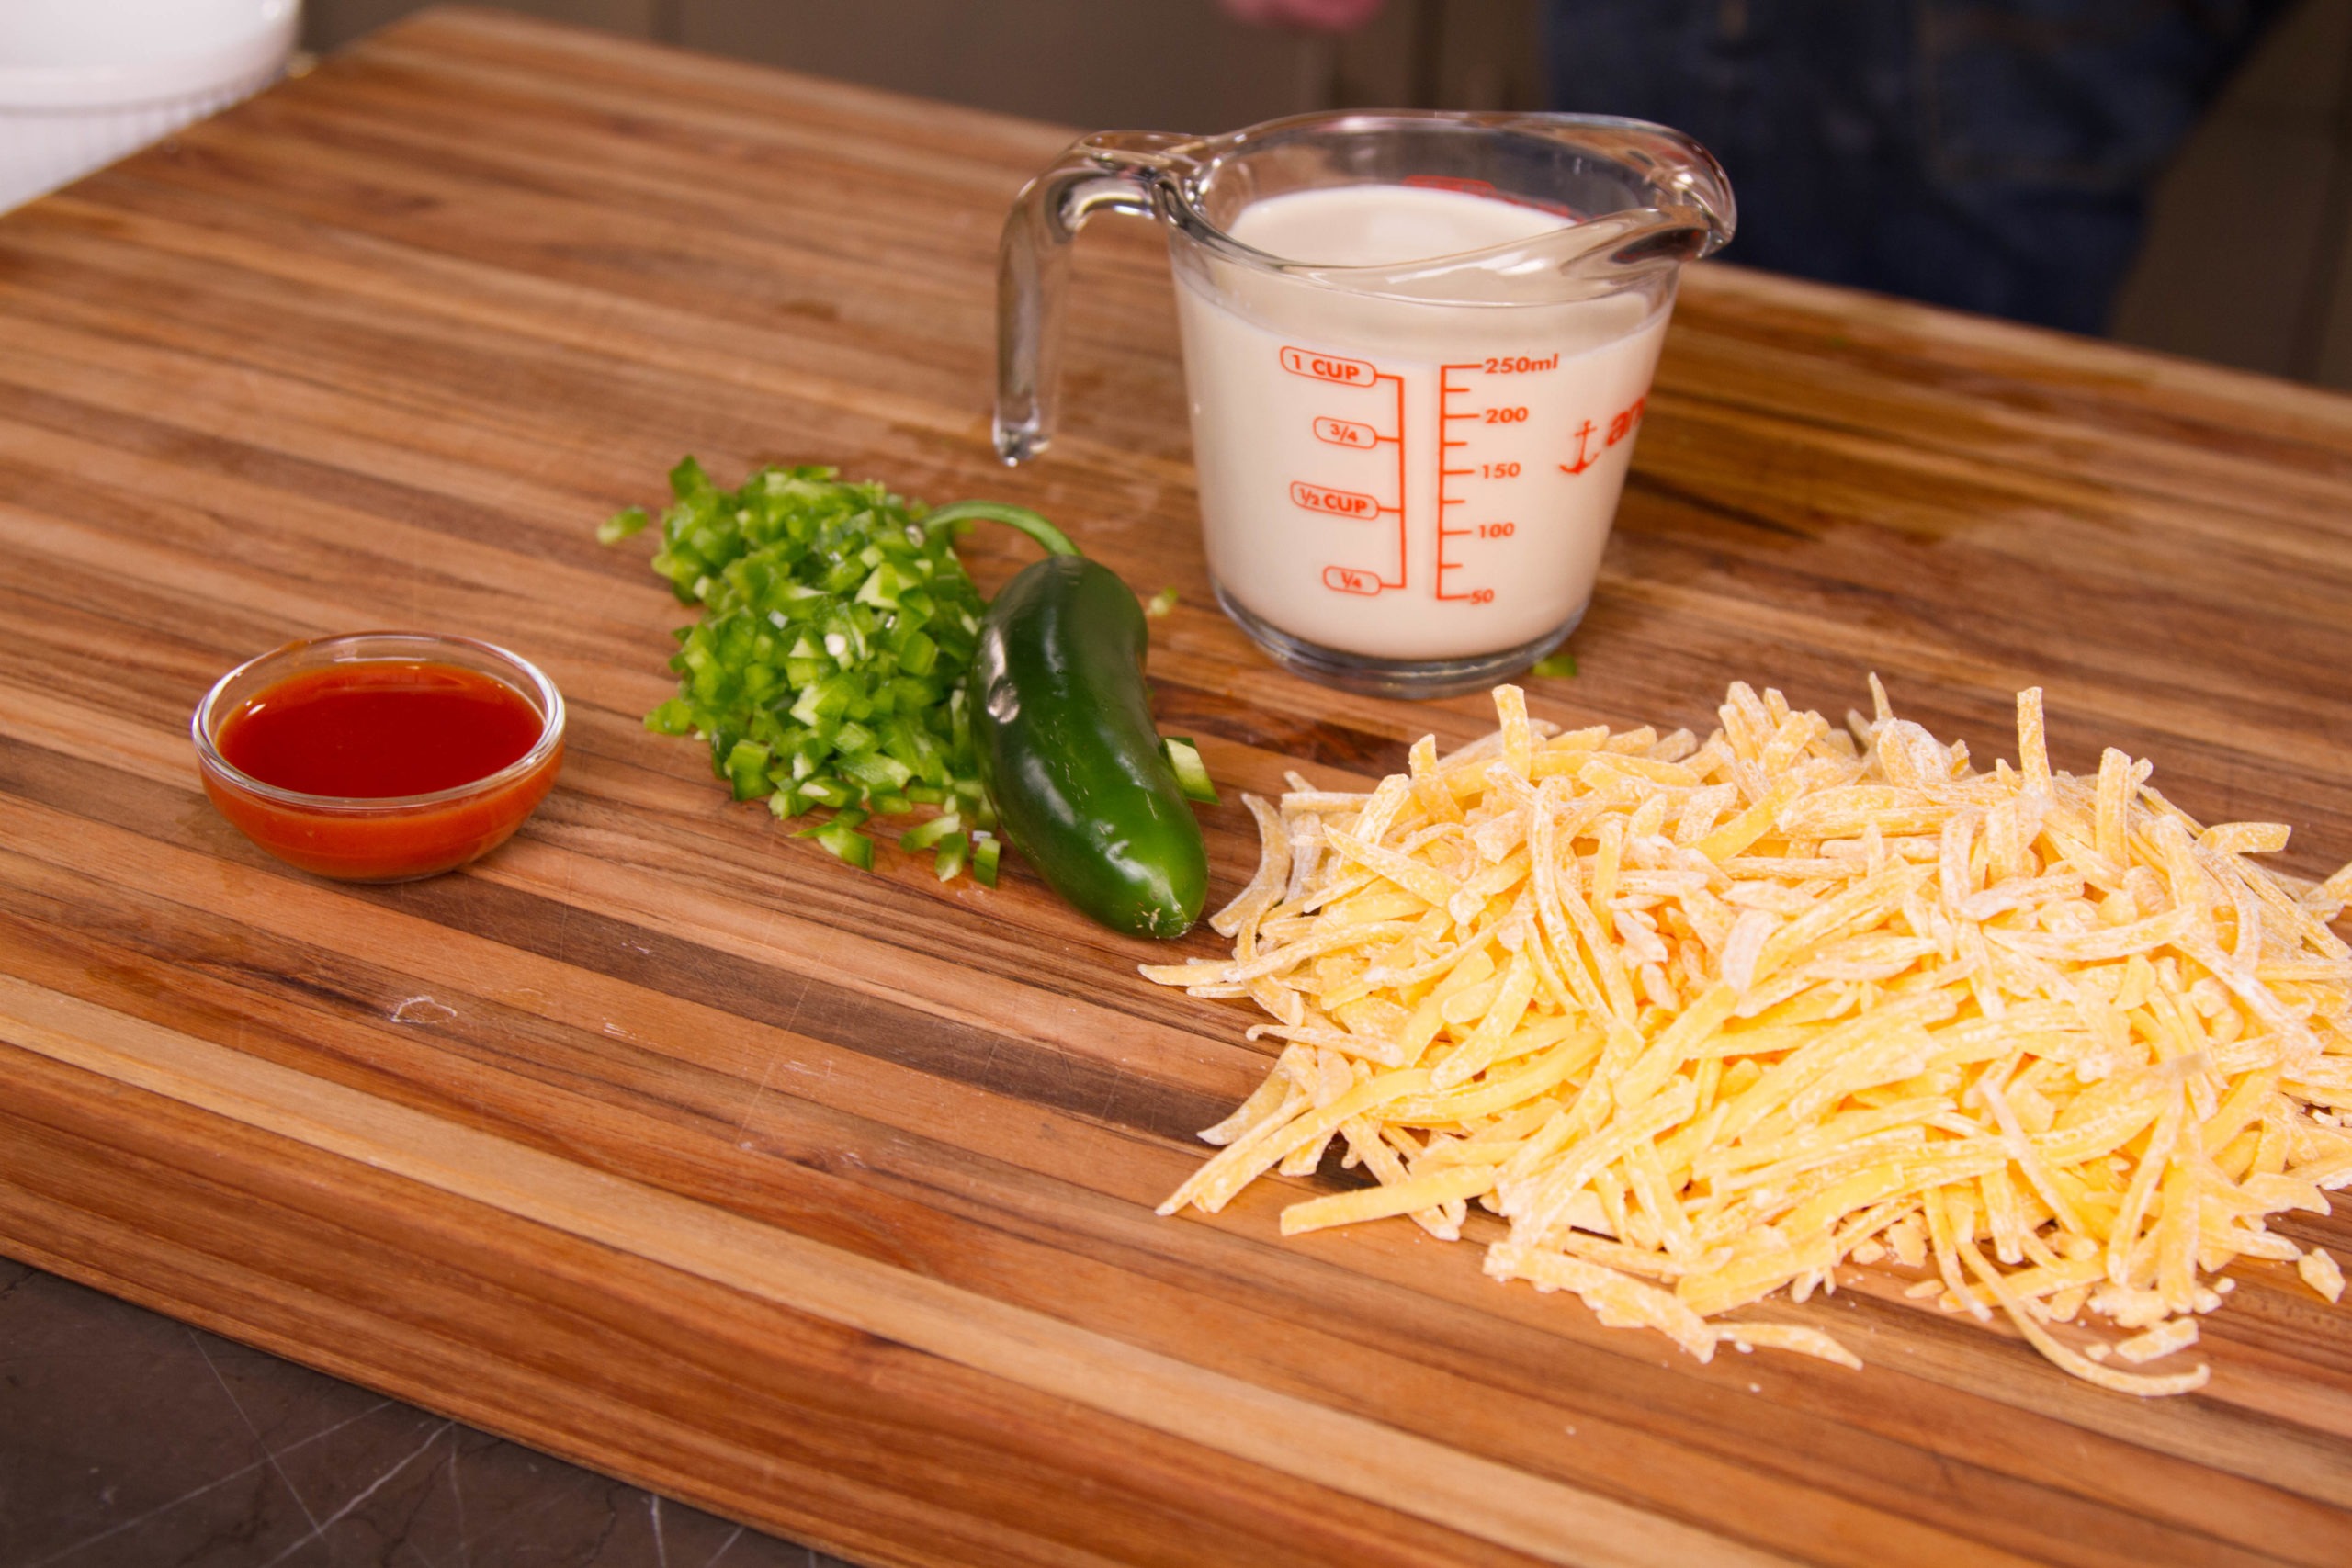 Cheese sauce ingredients